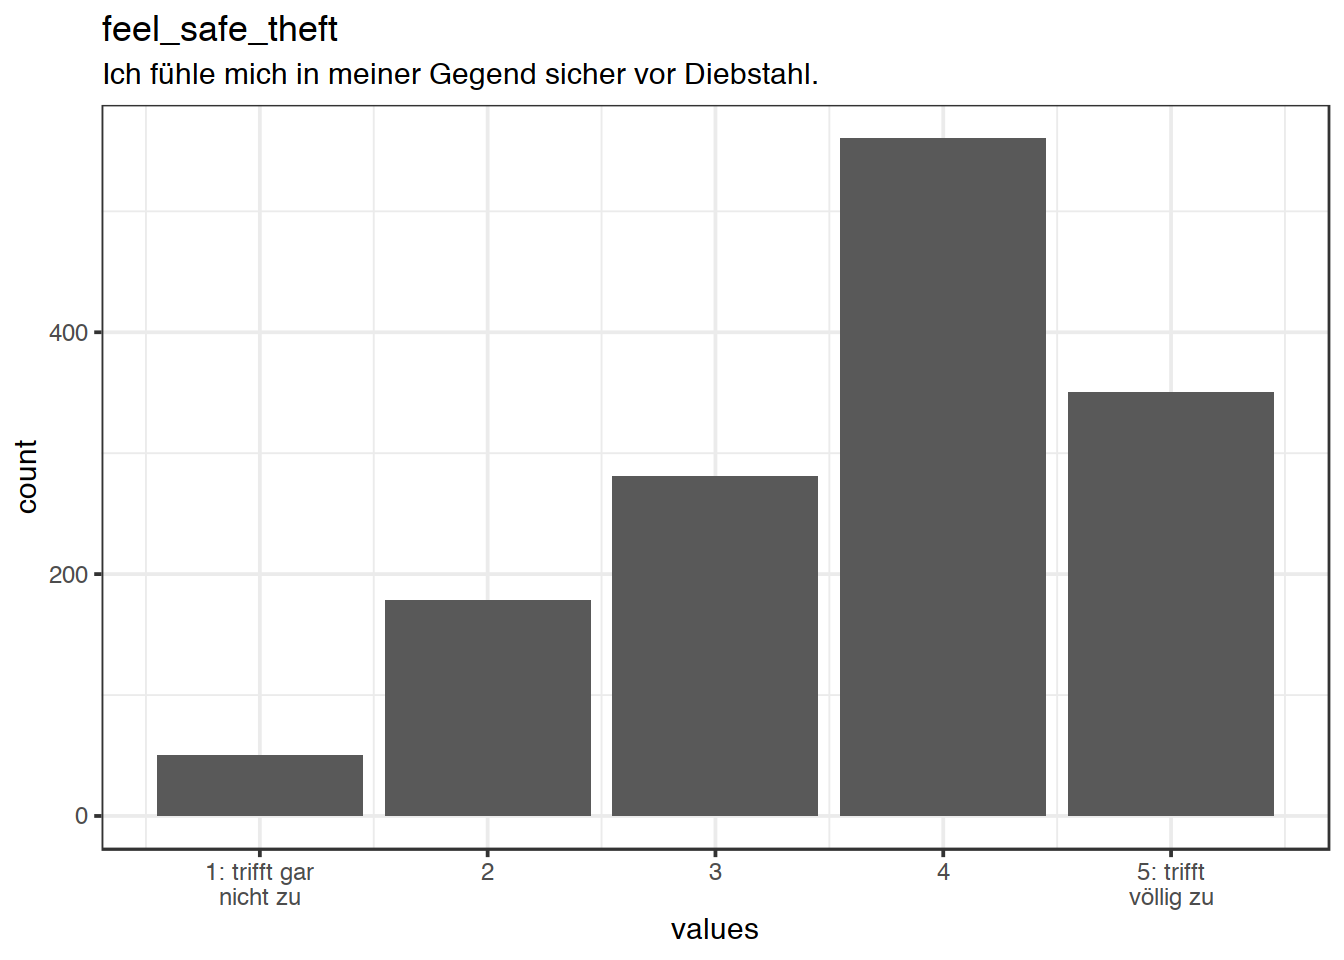 Distribution of values for feel_safe_theft